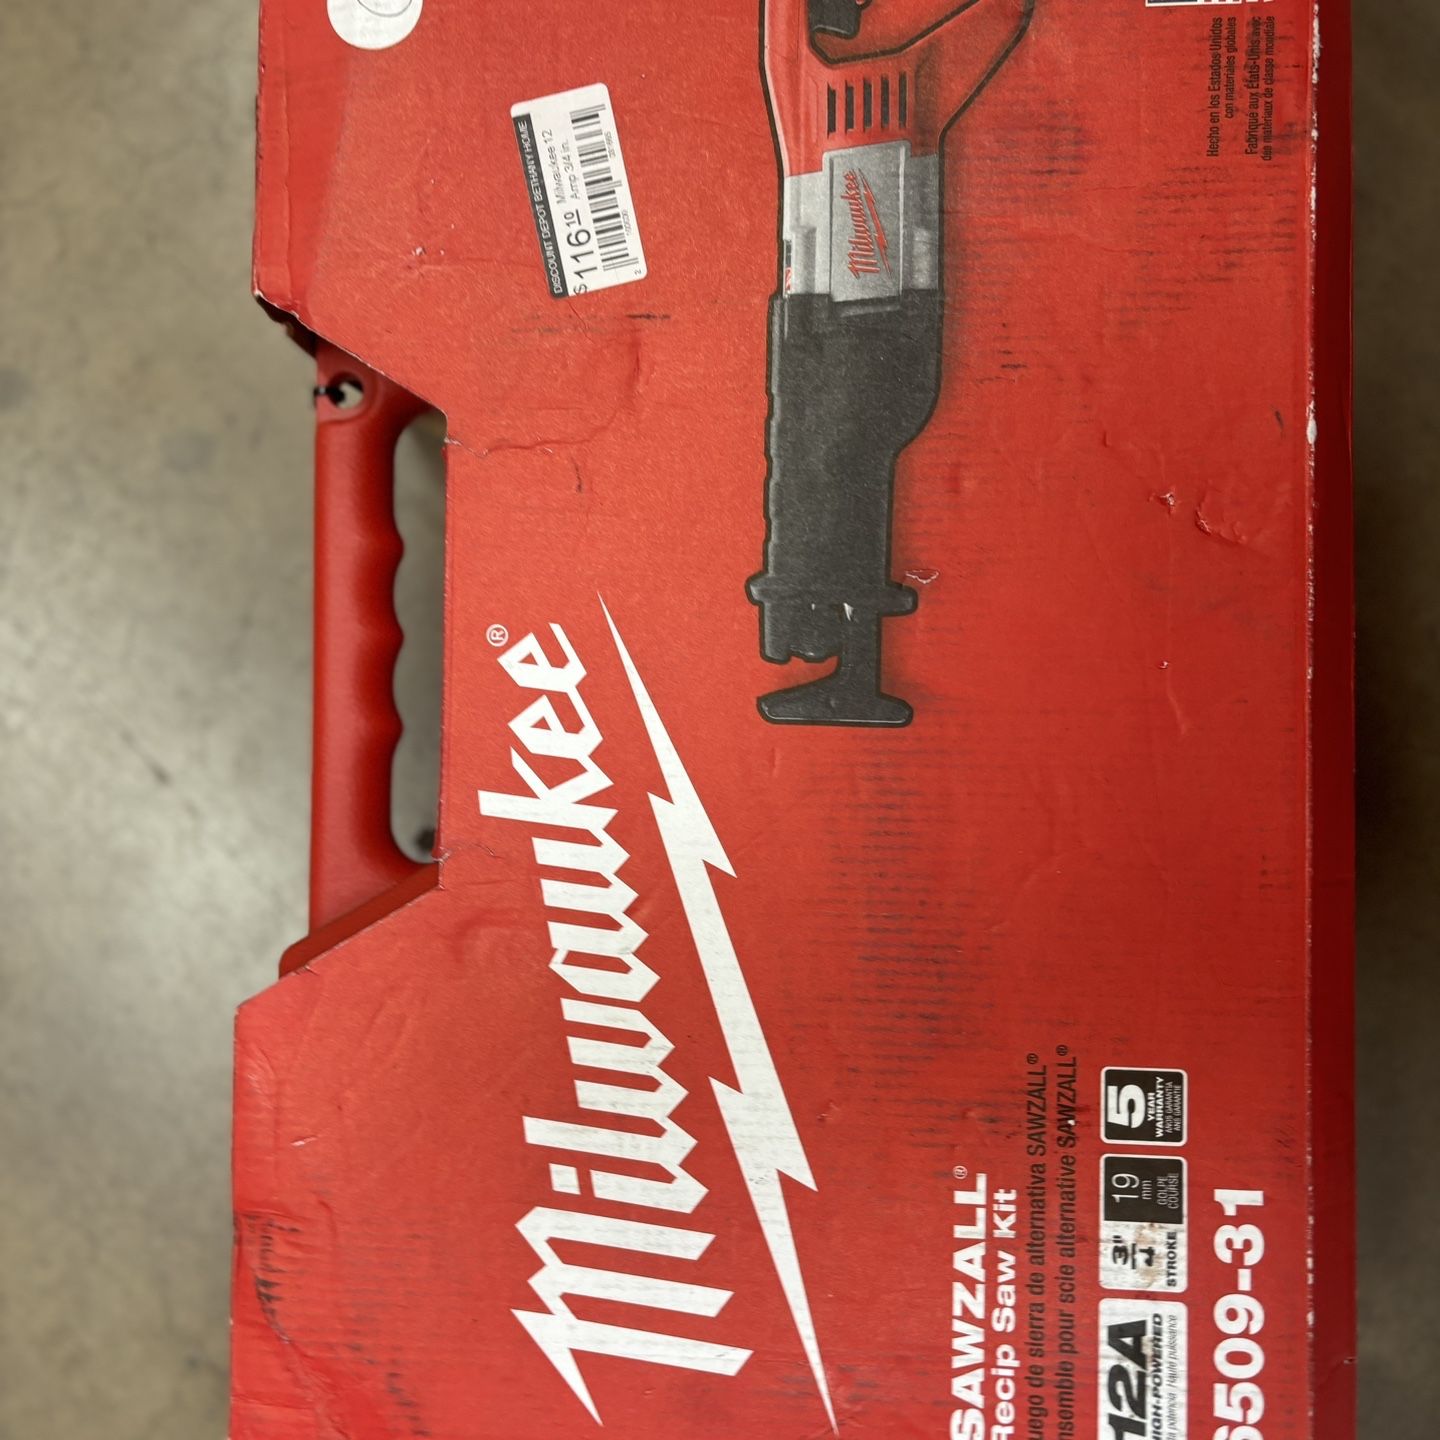 (New) Milwaukee 12 Amp 3/4 In. Stroke SAWZALL Reciprocating Saw With Hard Case 